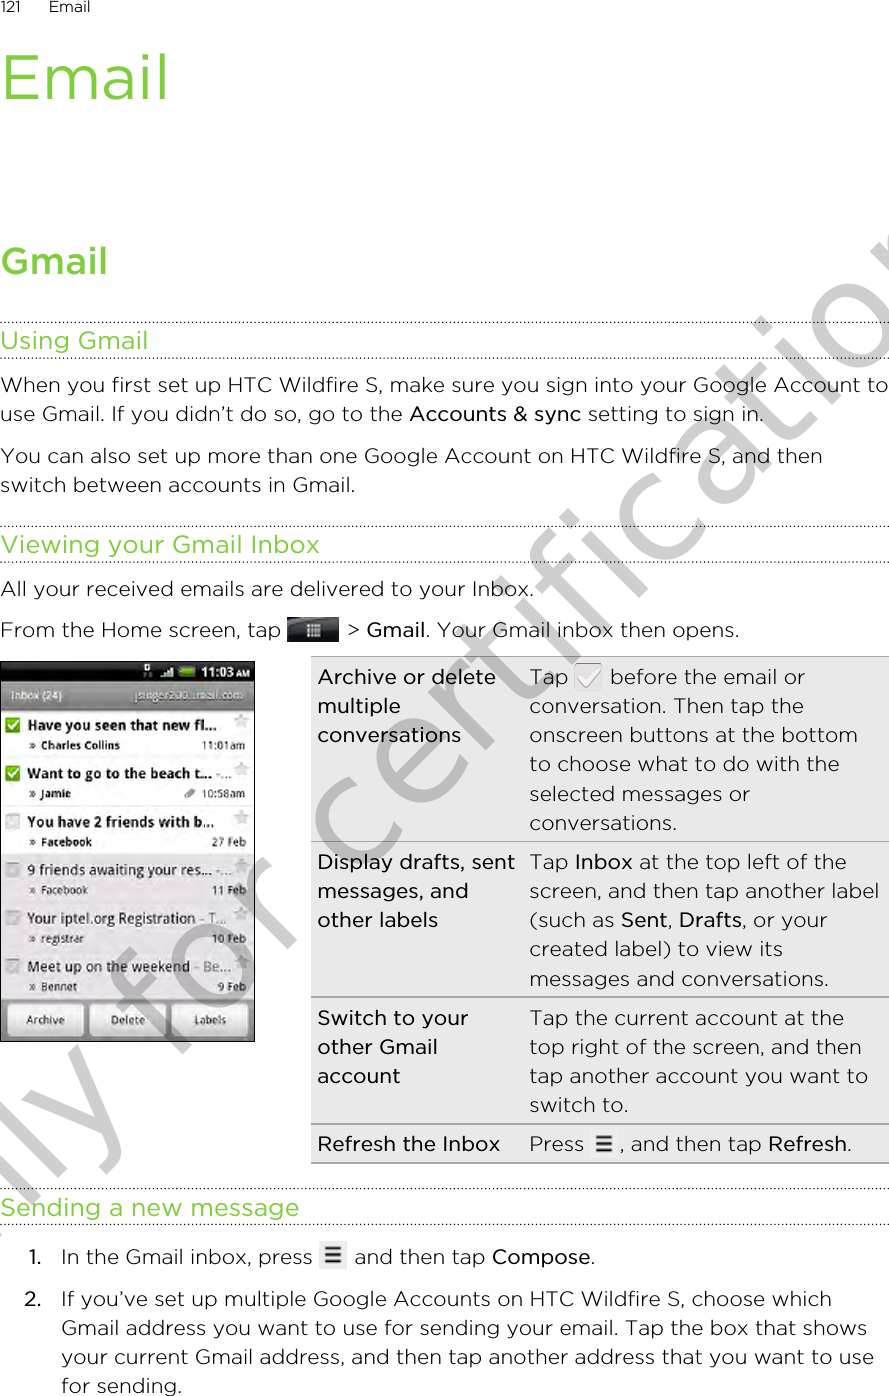 EmailGmailUsing GmailWhen you first set up HTC Wildfire S, make sure you sign into your Google Account touse Gmail. If you didn’t do so, go to the Accounts &amp; sync setting to sign in.You can also set up more than one Google Account on HTC Wildfire S, and thenswitch between accounts in Gmail.Viewing your Gmail InboxAll your received emails are delivered to your Inbox.From the Home screen, tap   &gt; Gmail. Your Gmail inbox then opens.Archive or deletemultipleconversationsTap   before the email orconversation. Then tap theonscreen buttons at the bottomto choose what to do with theselected messages orconversations.Display drafts, sentmessages, andother labelsTap Inbox at the top left of thescreen, and then tap another label(such as Sent, Drafts, or yourcreated label) to view itsmessages and conversations.Switch to yourother GmailaccountTap the current account at thetop right of the screen, and thentap another account you want toswitch to.Refresh the Inbox Press  , and then tap Refresh.Sending a new message1. In the Gmail inbox, press   and then tap Compose.2. If you’ve set up multiple Google Accounts on HTC Wildfire S, choose whichGmail address you want to use for sending your email. Tap the box that showsyour current Gmail address, and then tap another address that you want to usefor sending.121 EmailOnly for certification